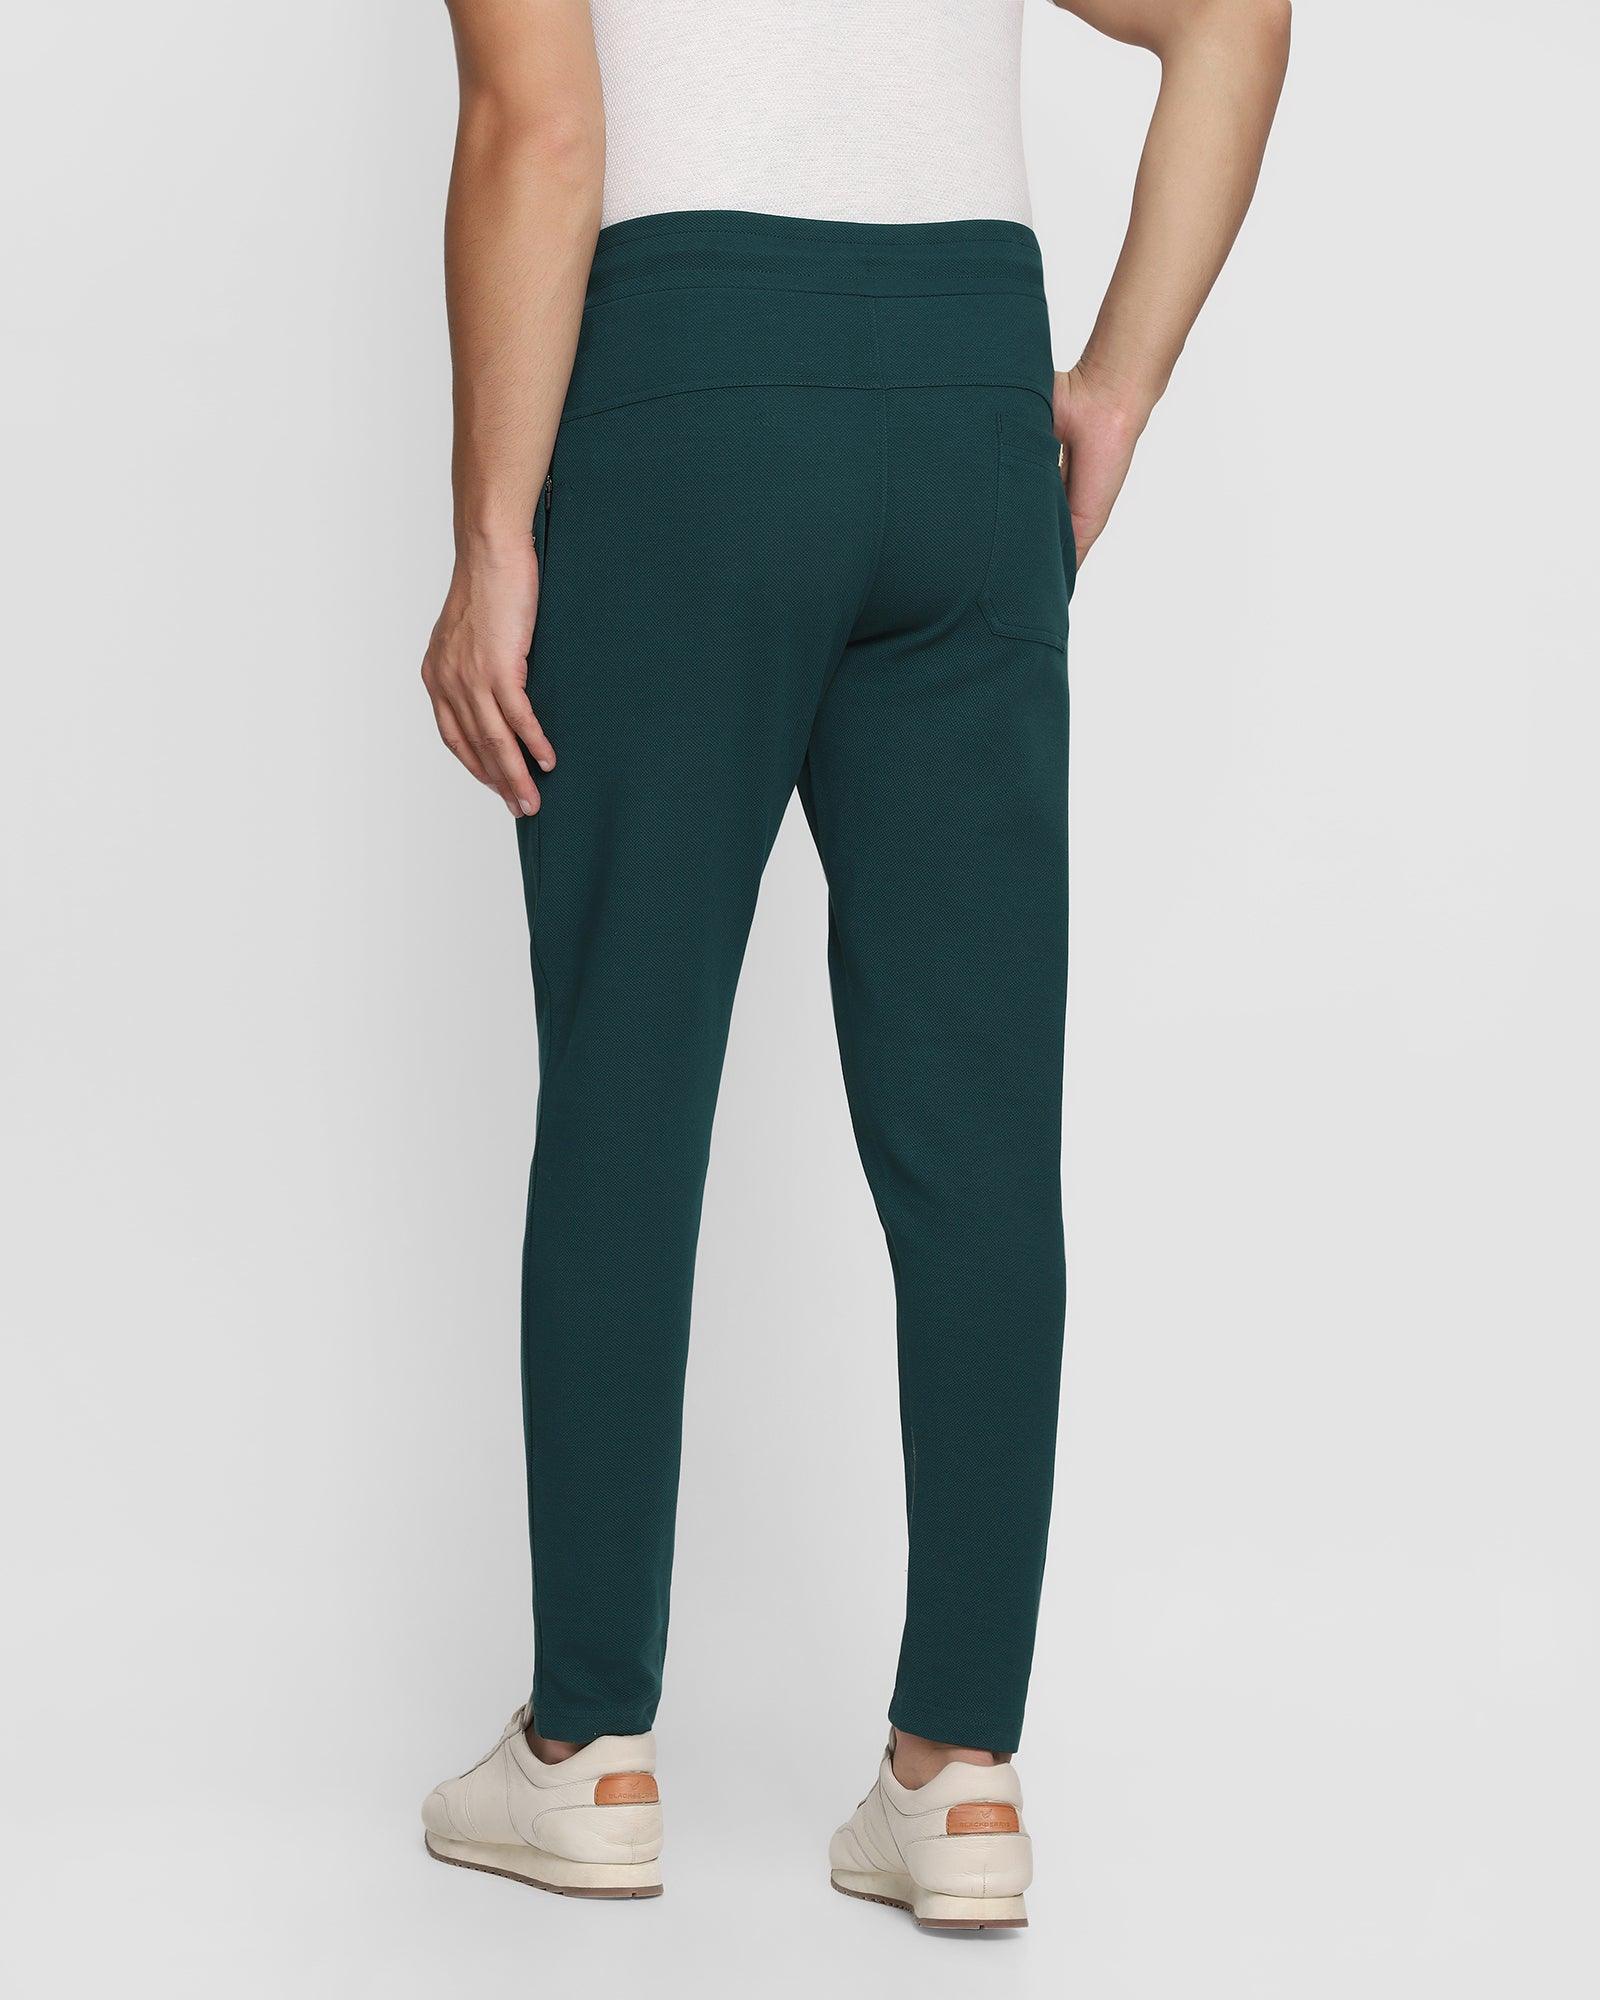 Casual Teal Solid Jogger - Champ